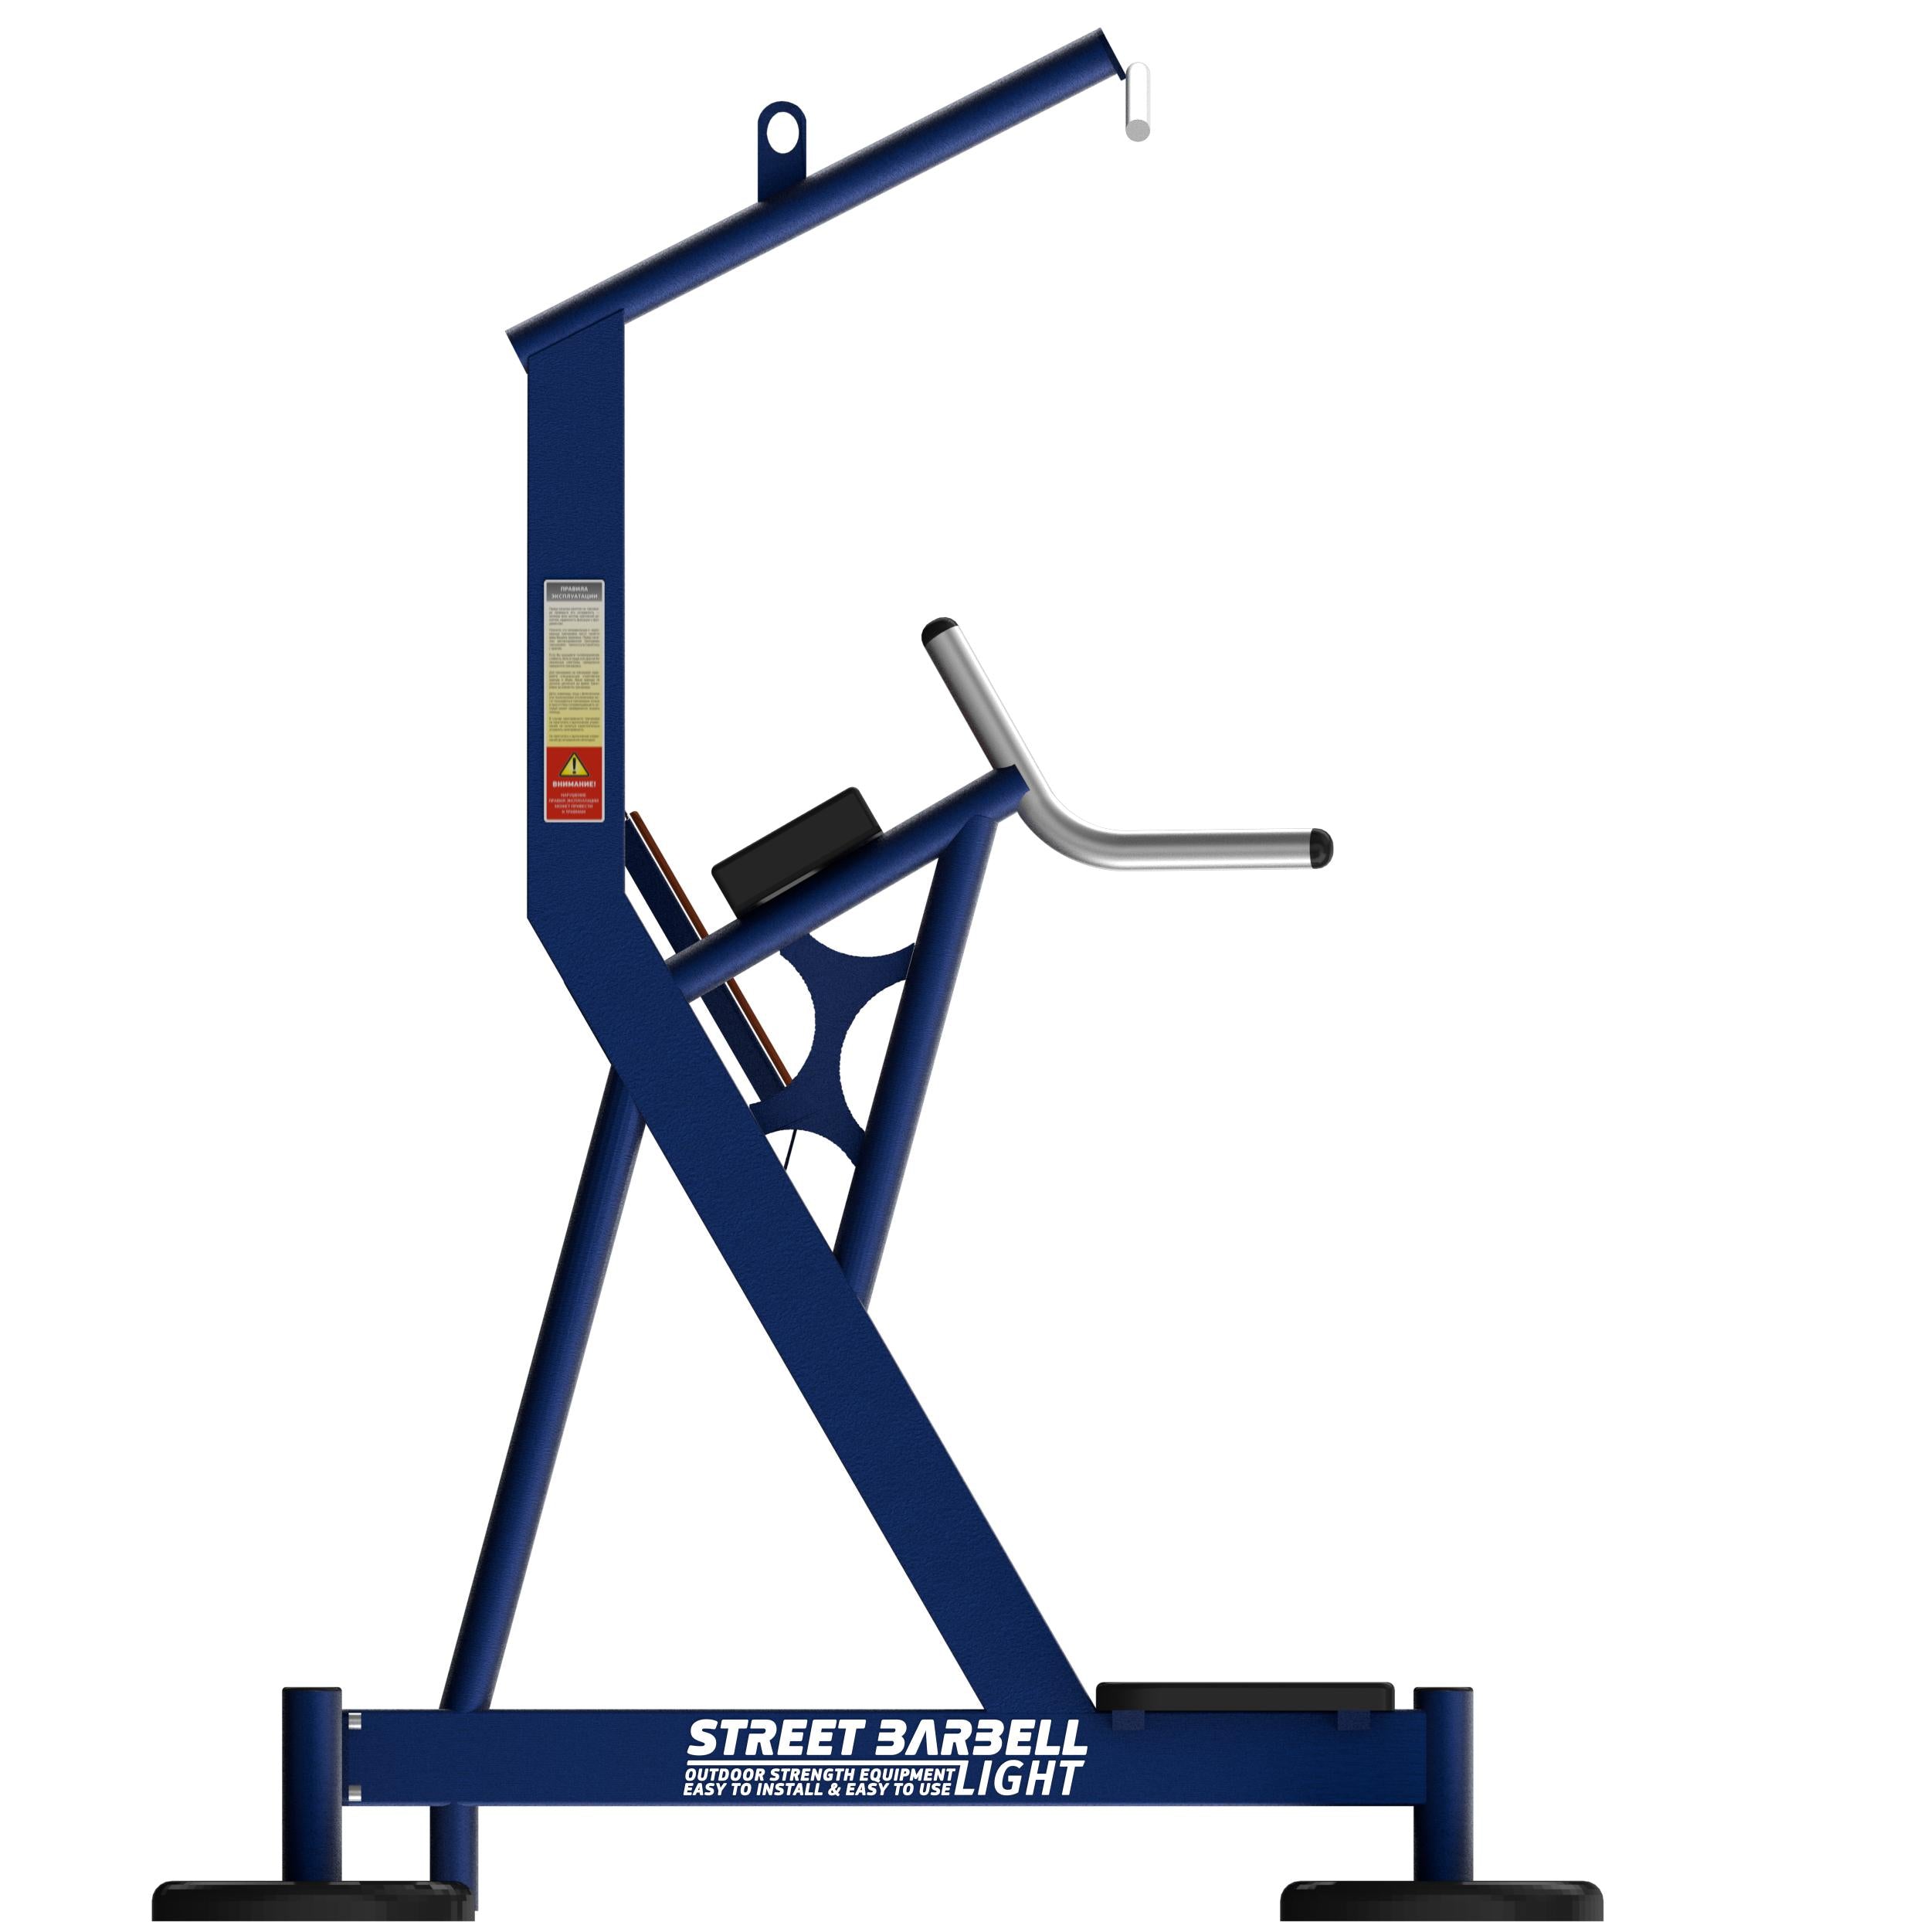 Street Barbell USA Combined Exerciser (Outdoor Gym Equipment)